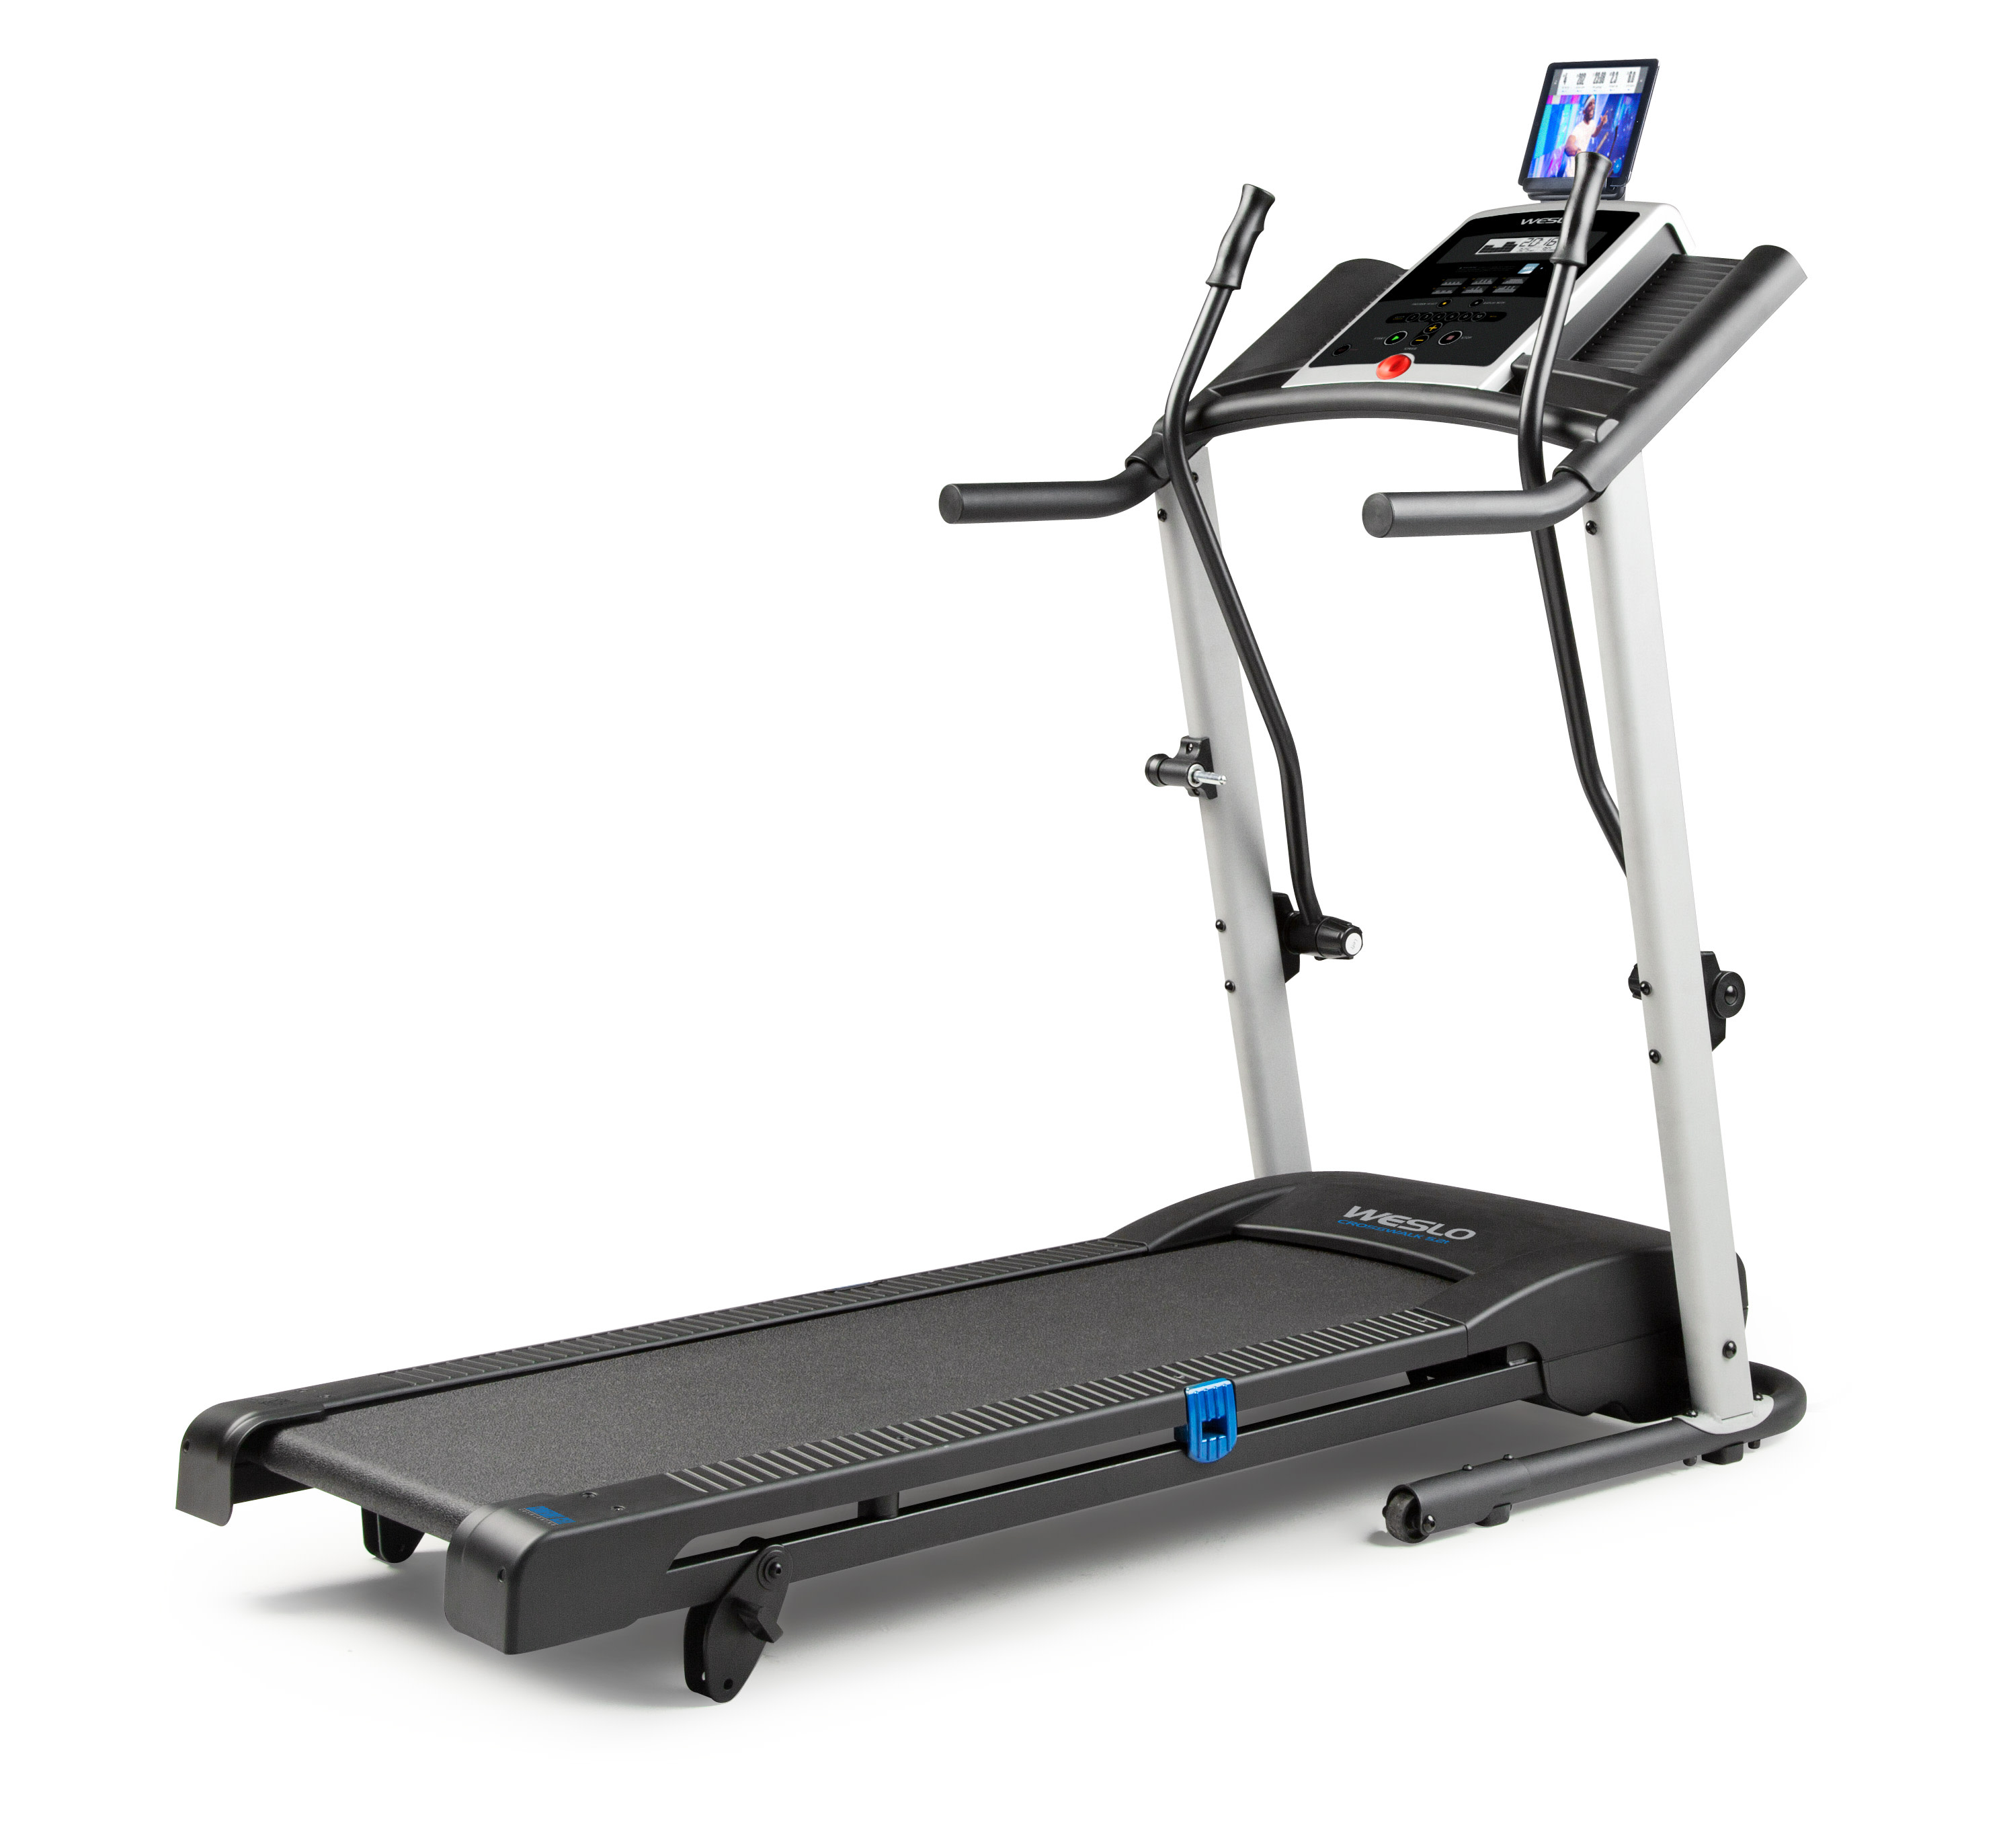 Weslo Crosswalk 5.2t Total Body Treadmill with Upper Body Workout Arms, iFIT Bluetooth Enabled - image 5 of 23